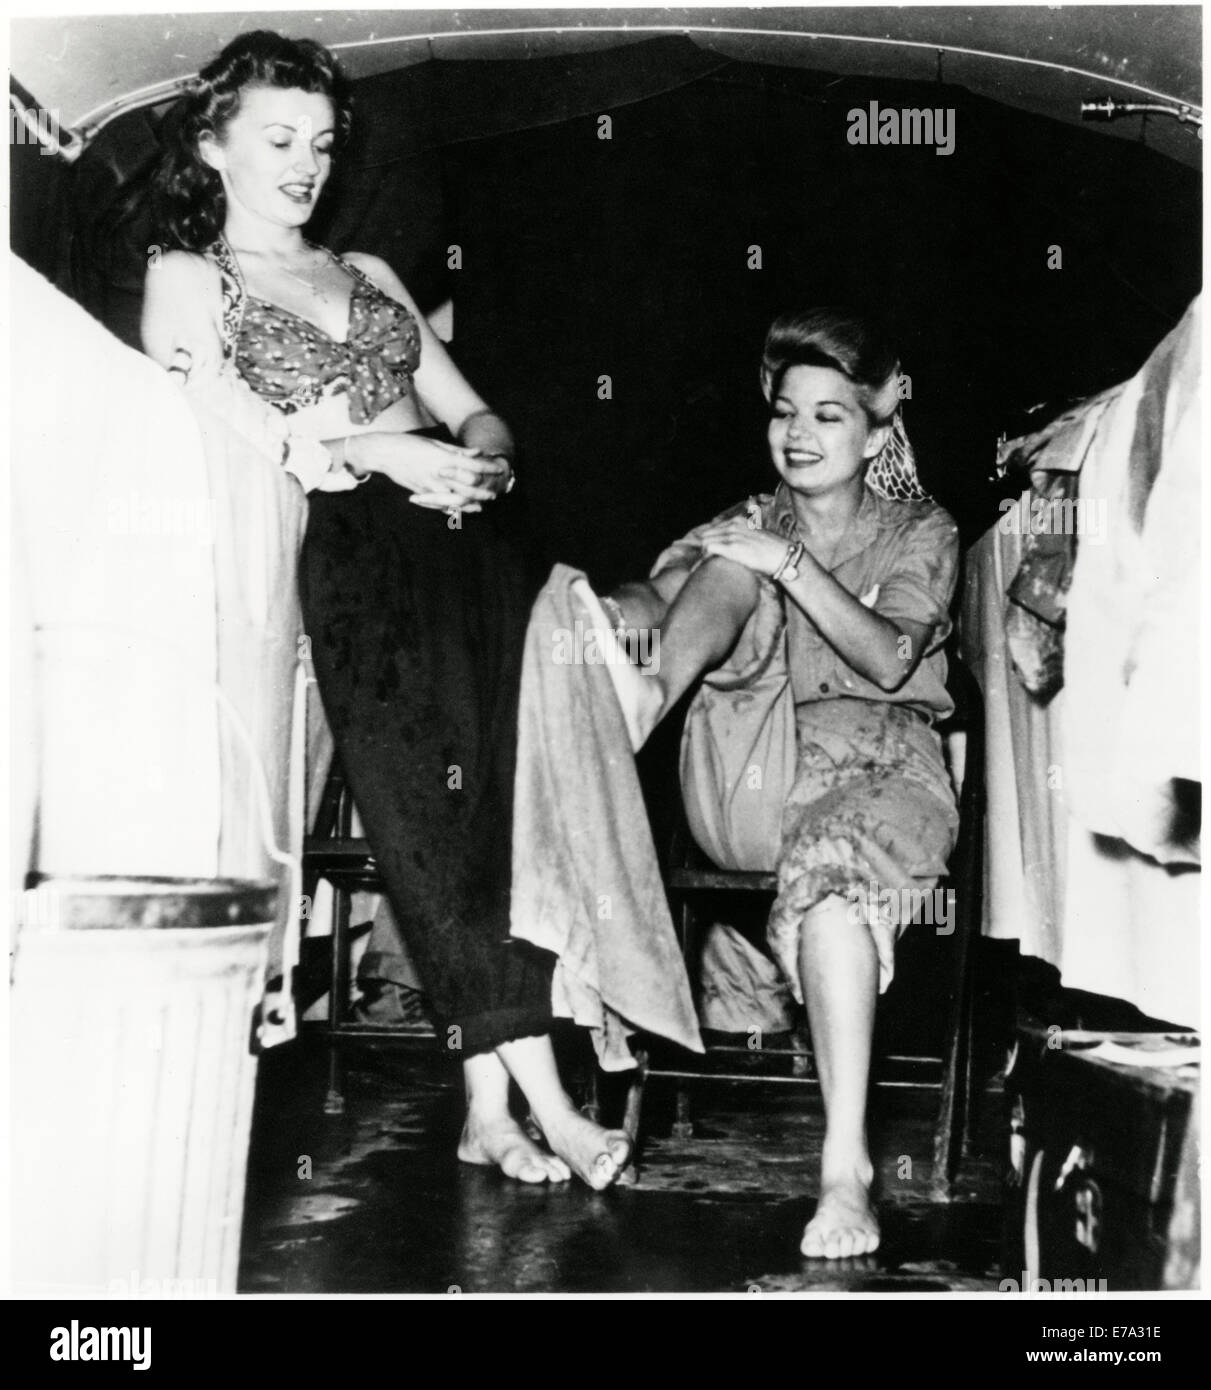 Patty Thomas (L) and Francis Langford relaxing While Part of Bob Hope's World War II Troupe of Performers, early 1940's Stock Photo